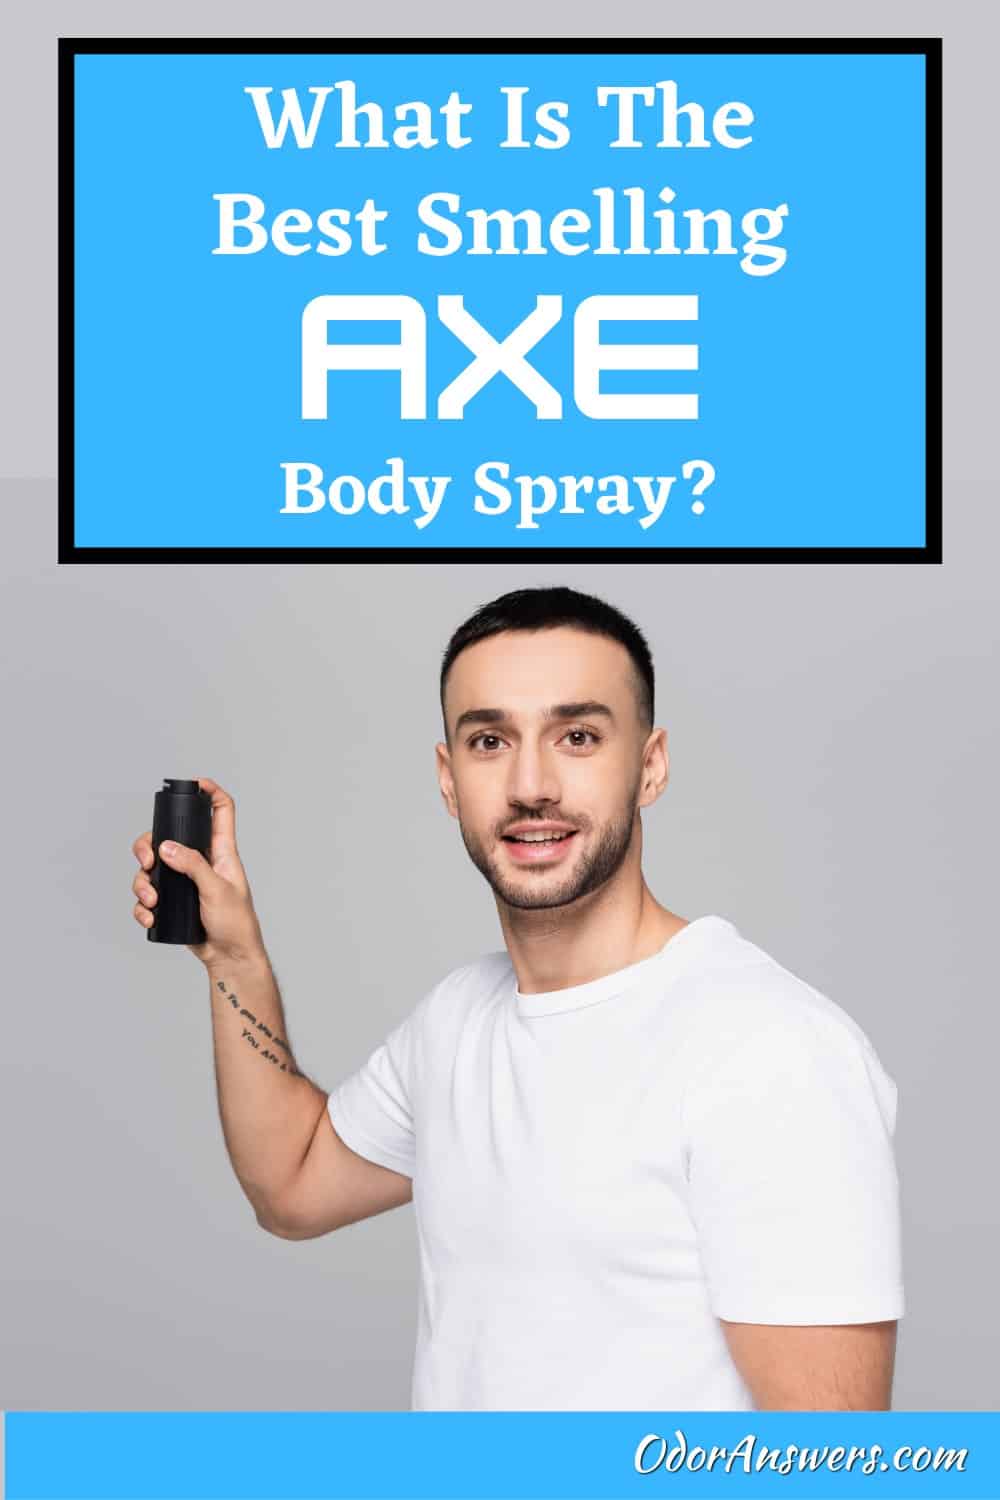 What Axe Smells the Best?